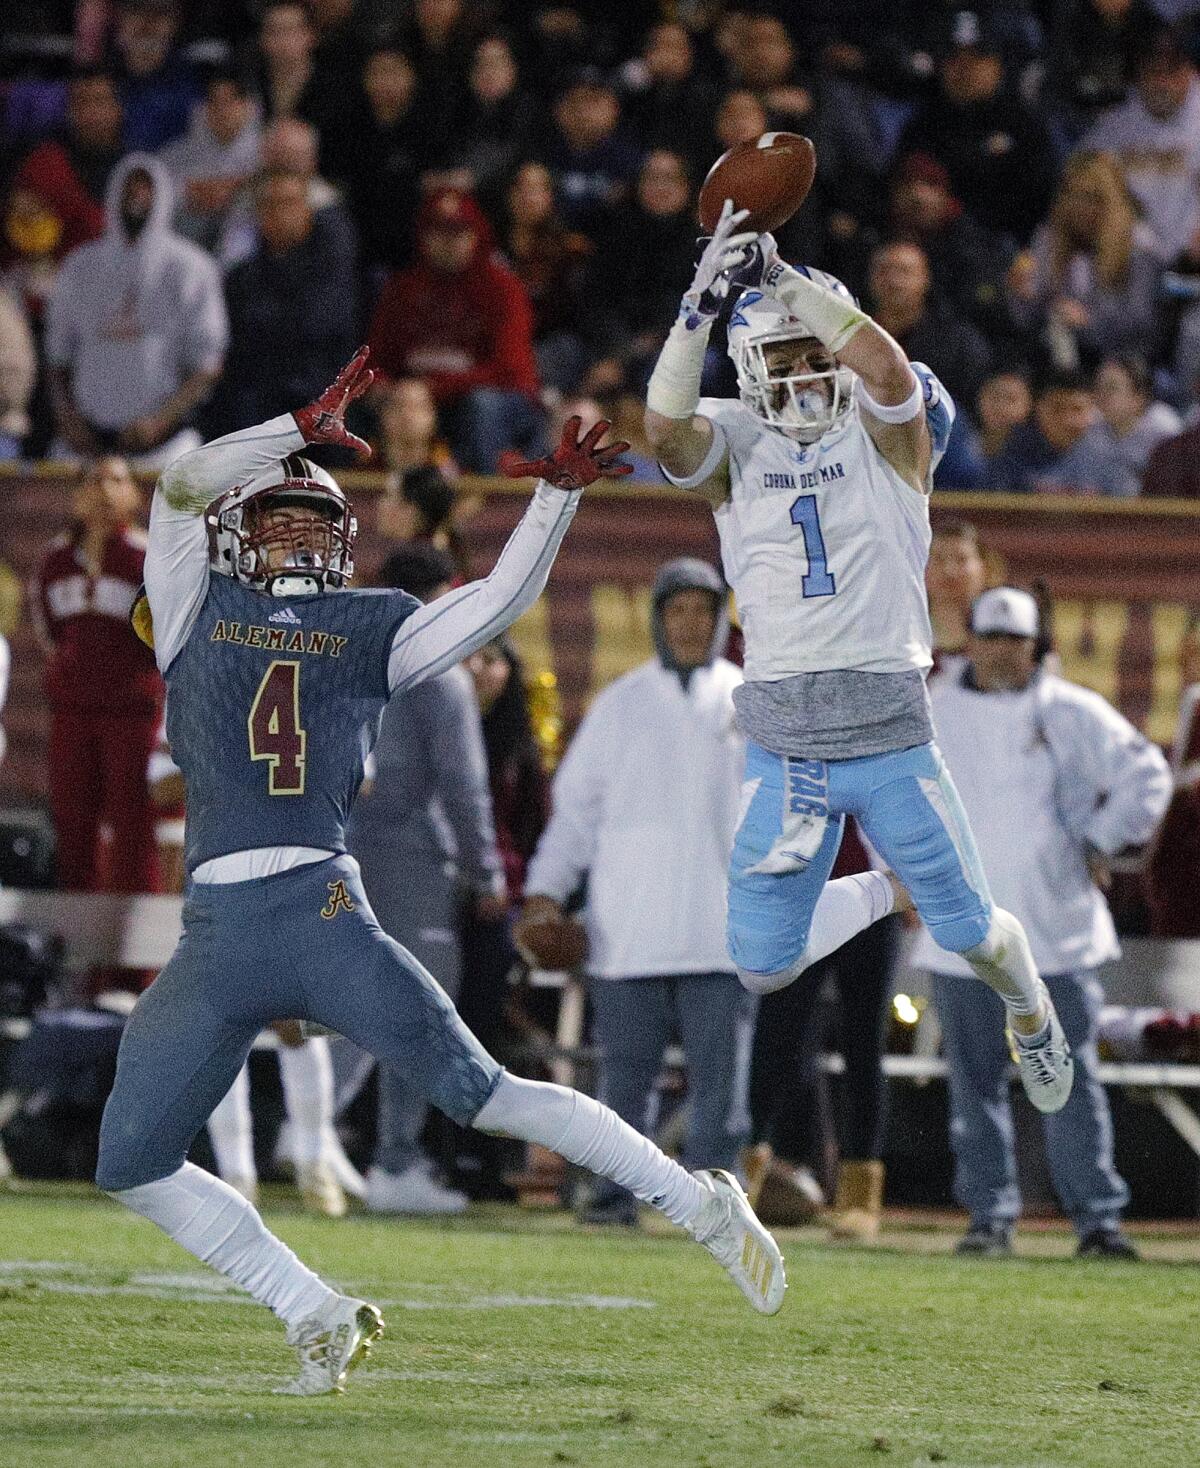 Corona del Mar's Chandler Fincher tips the ball in the air on a pass to Alemany's DJ Justice and intercepts it in a CIF Southern Section Division 3 semifinal game in Mission Hills on Friday.